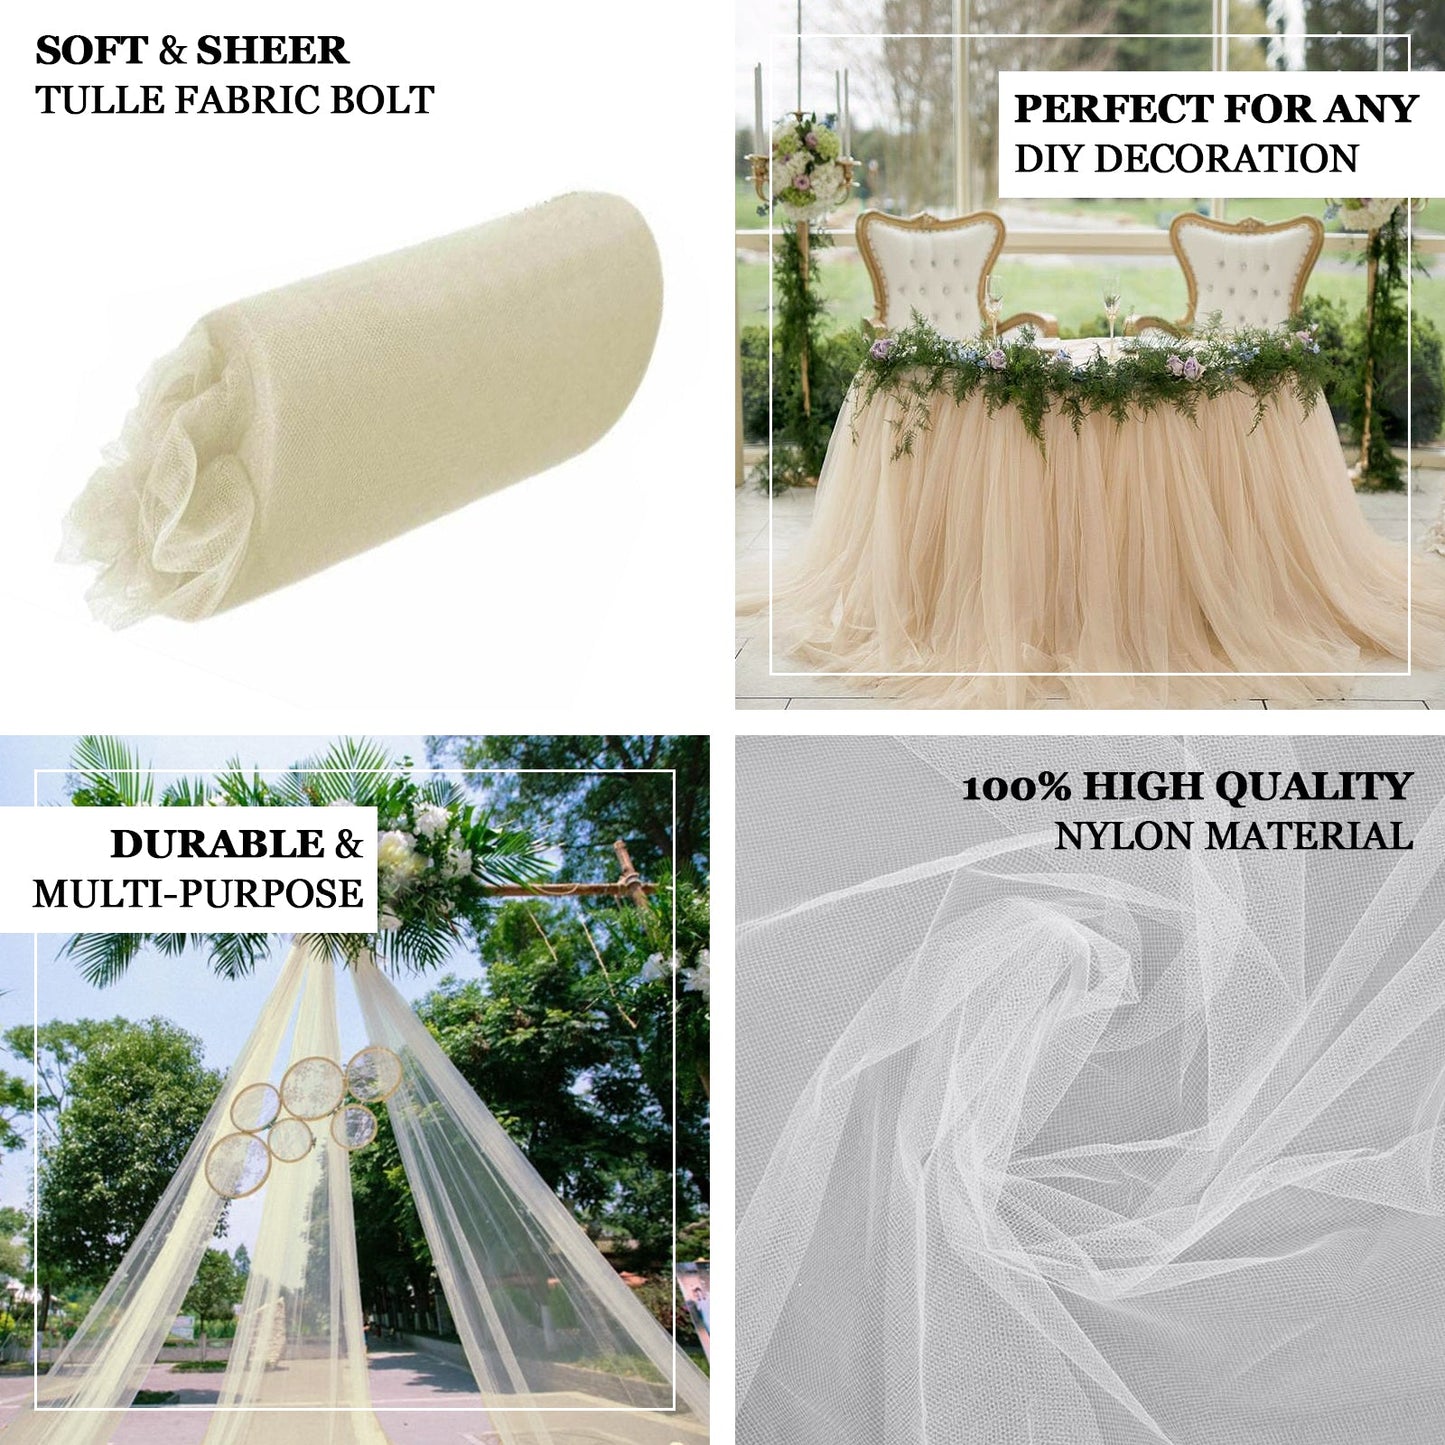 18"x100 Yards Natural Tulle Fabric Bolt, Sheer Fabric Spool Roll For Crafts